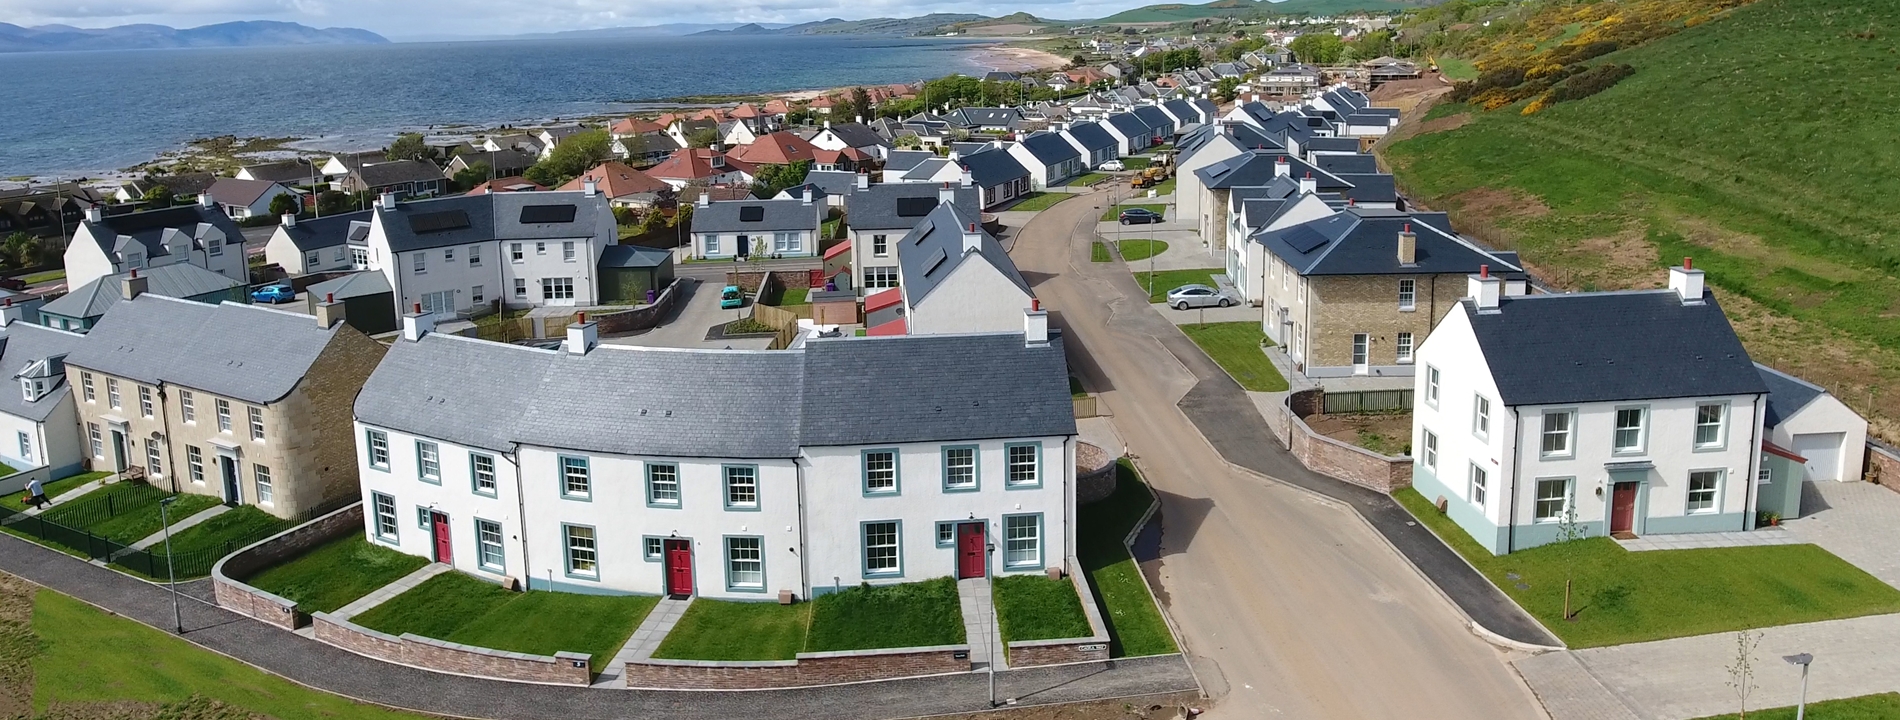 An aerial shot showing the Chapelton development and the sea view beyond.